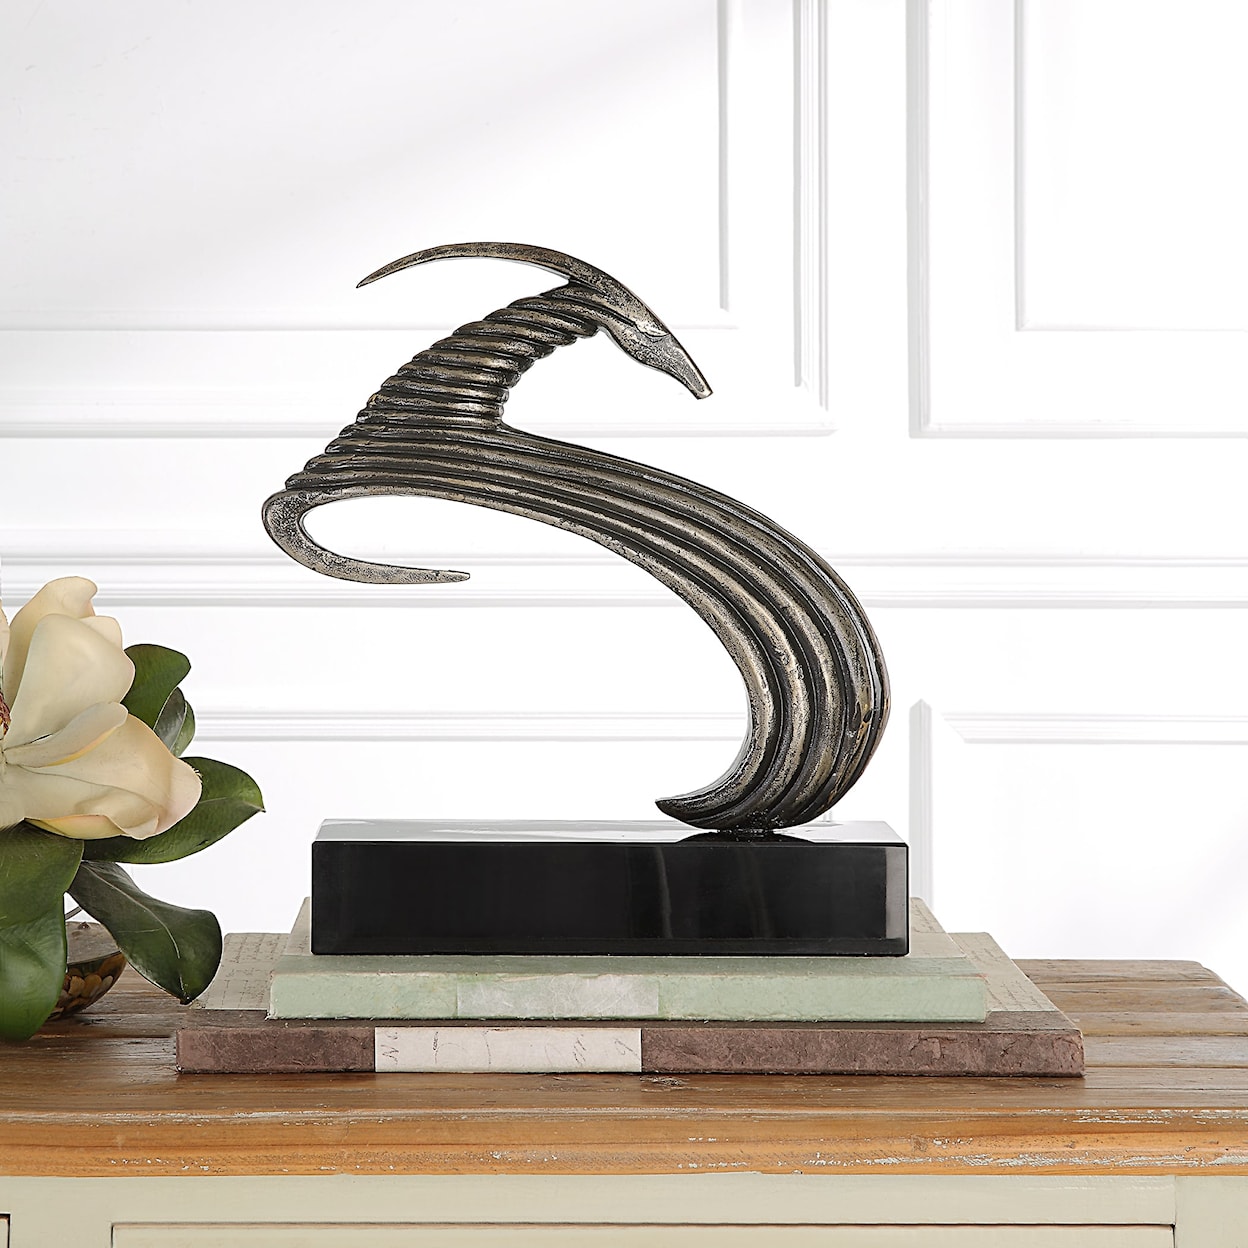 Uttermost Take The Lead Ram Sculpture with Black Marble Base